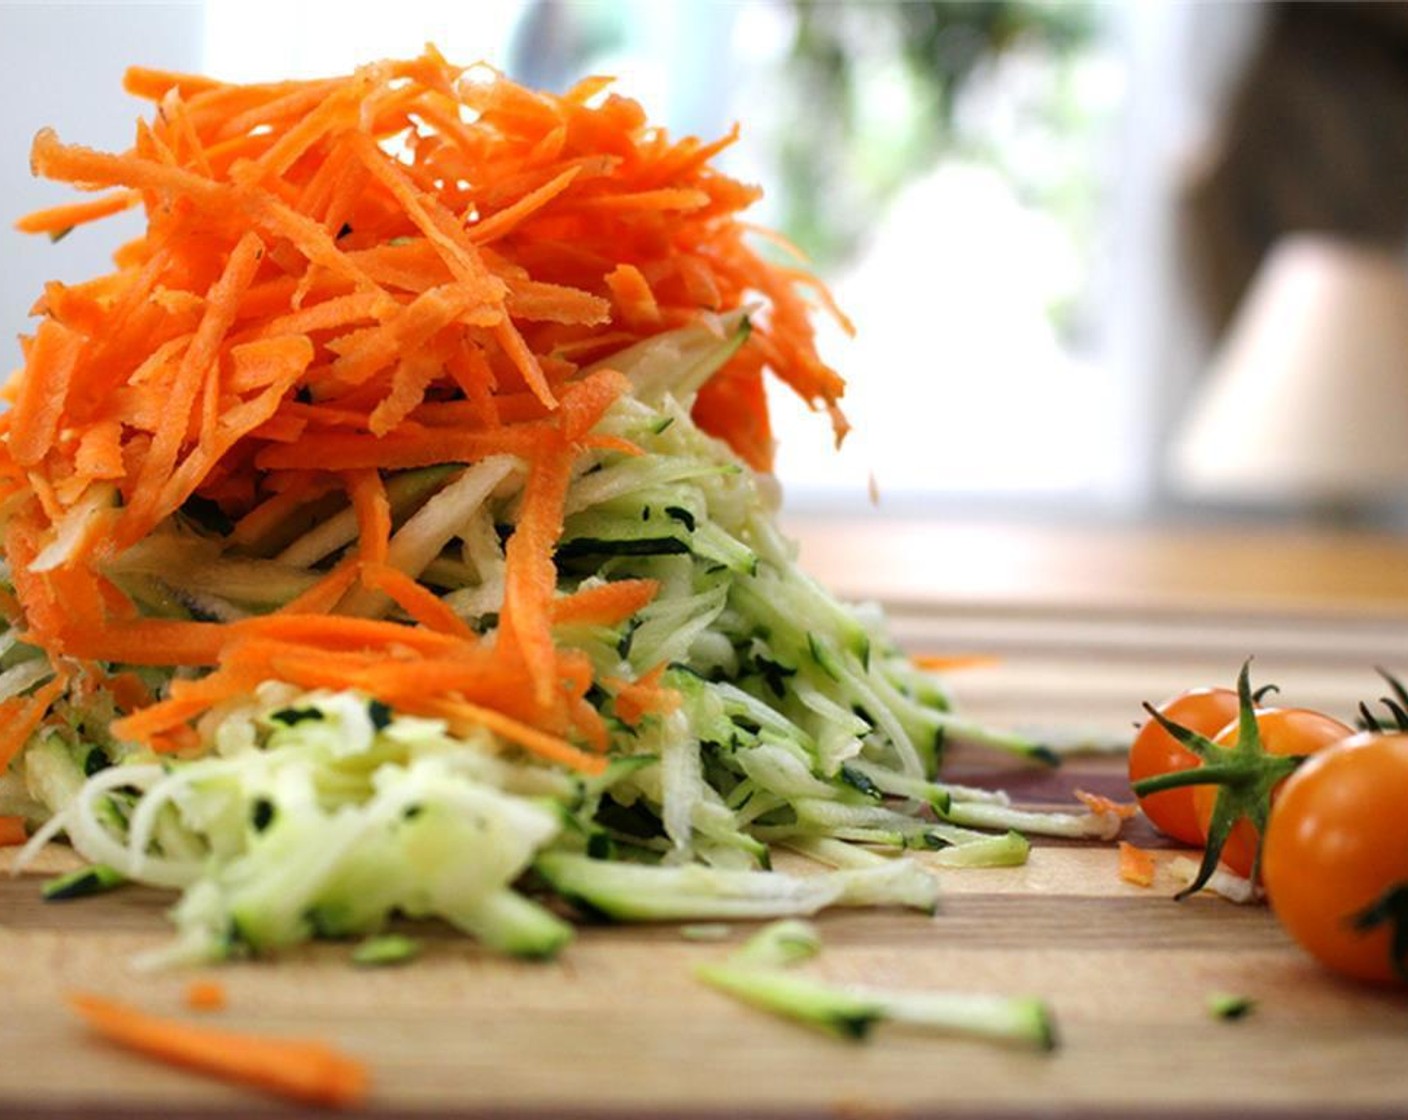 step 1 In a bowl, grate the Zucchini (2 cups) and Carrot (1 cup).